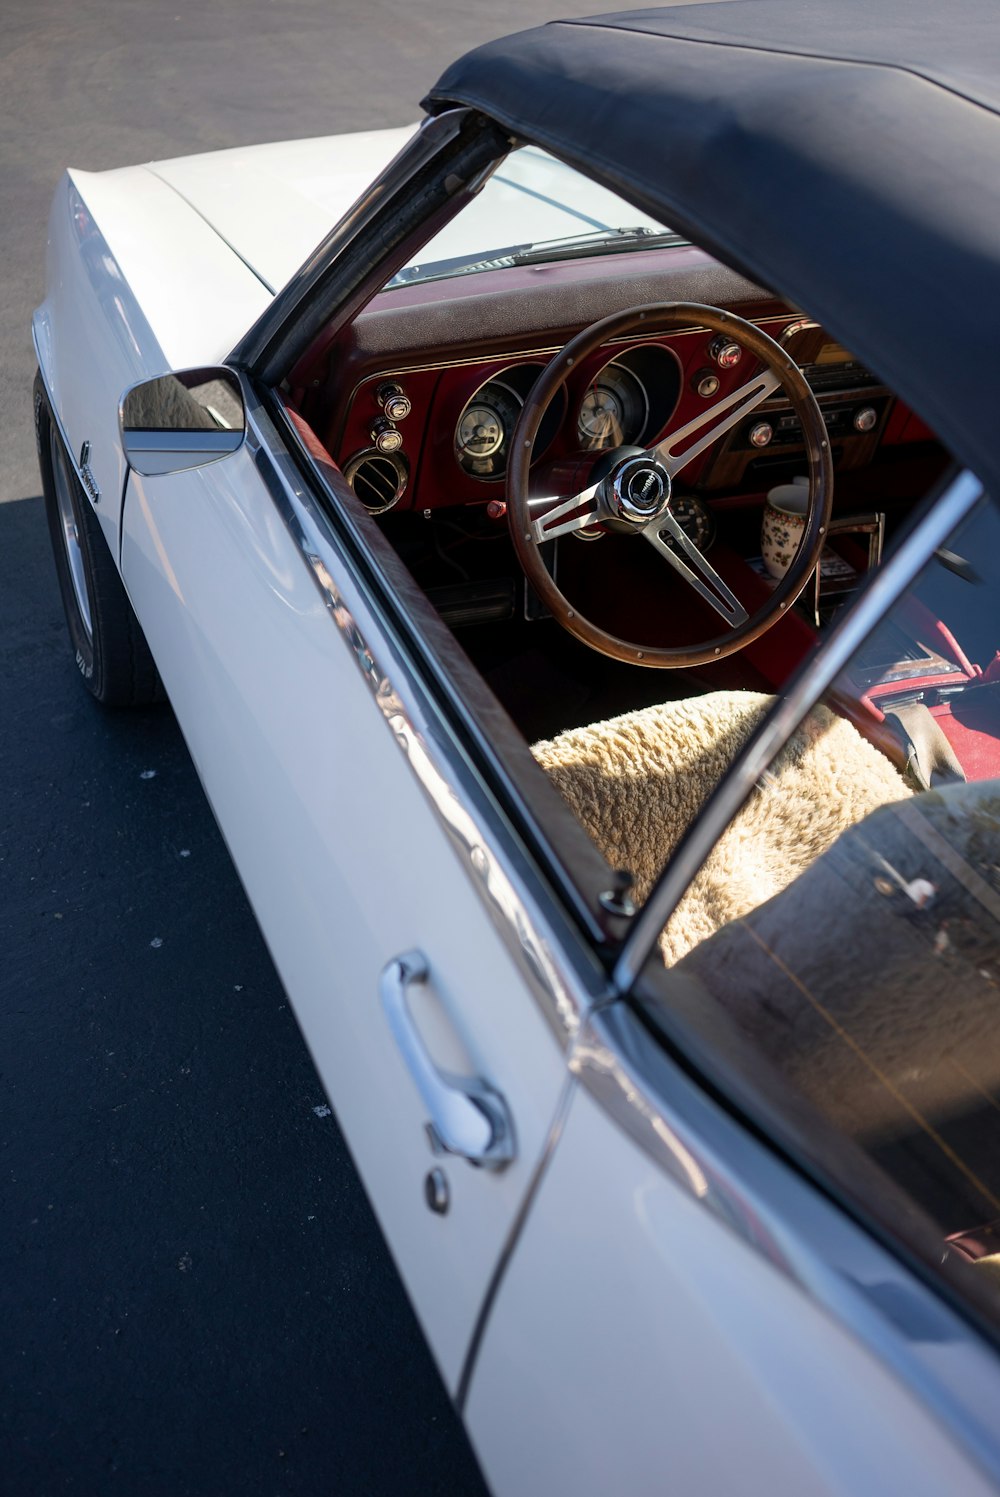 the interior of a classic car with a sheep in the driver's seat